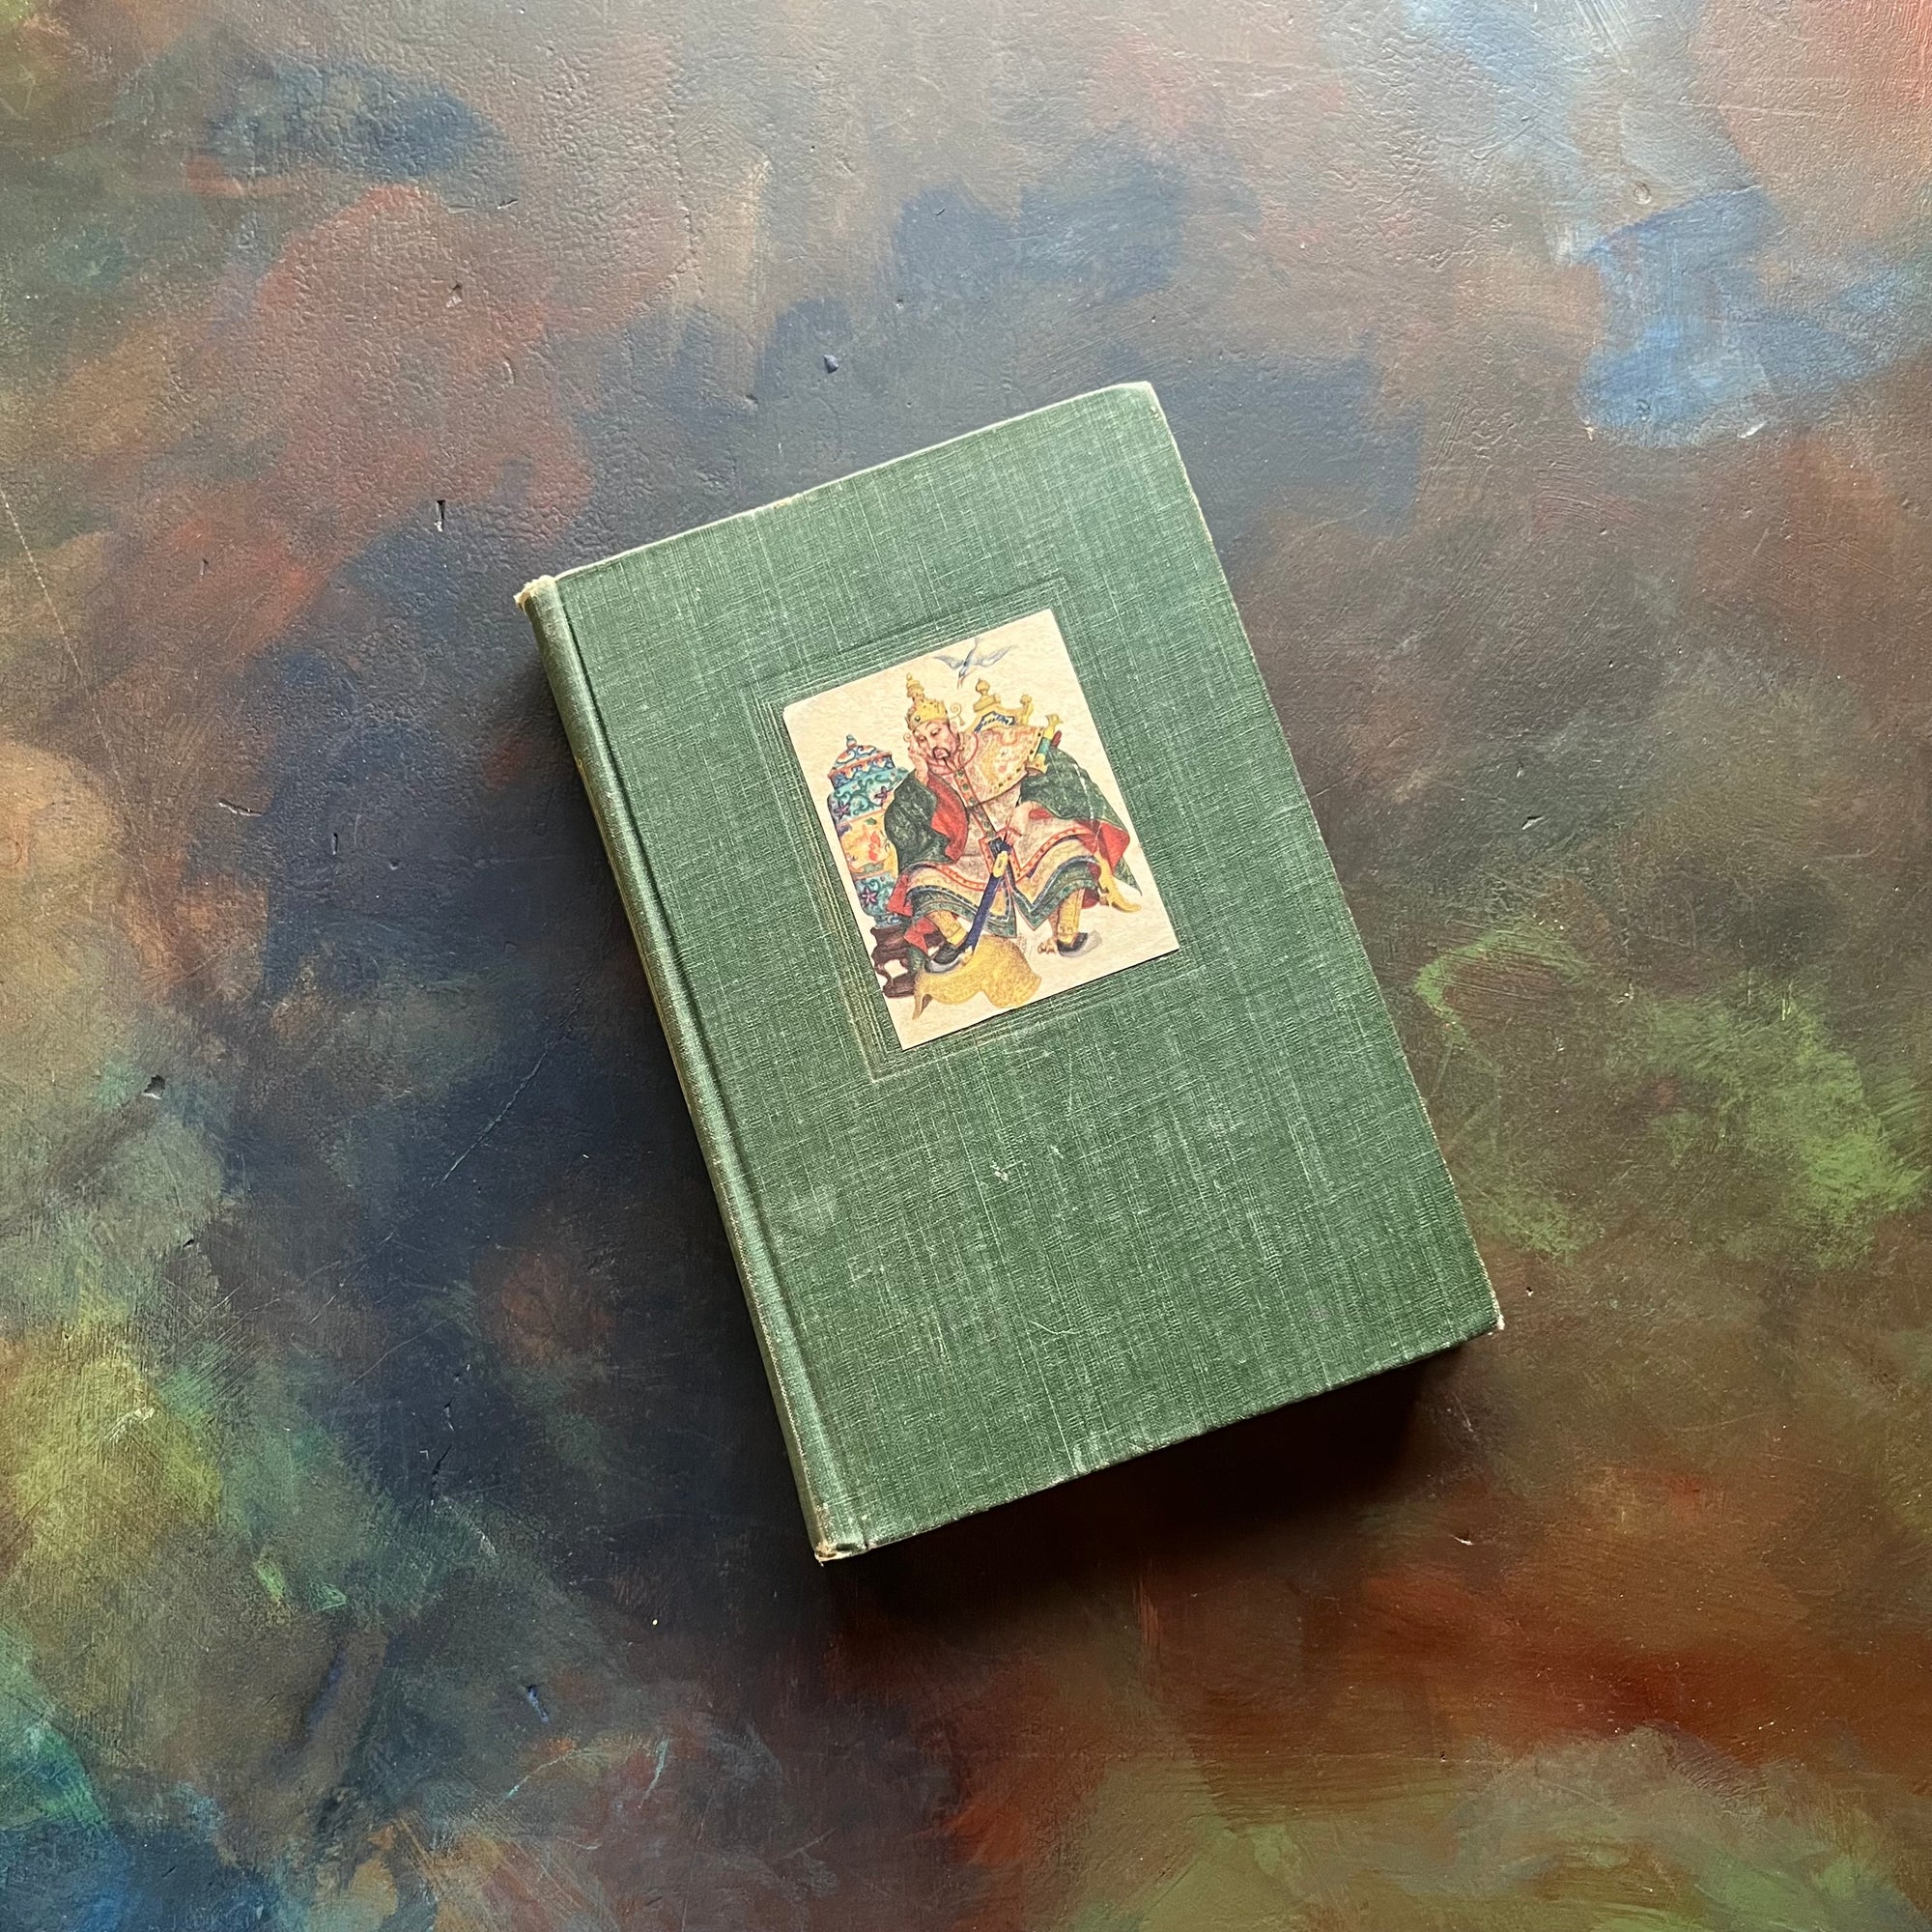 Andersen's Fairy Tales by Hans Christian Andersen-vintage fairy tales for children-view of the front, clothbound cover in green with an illustration attached to the cover